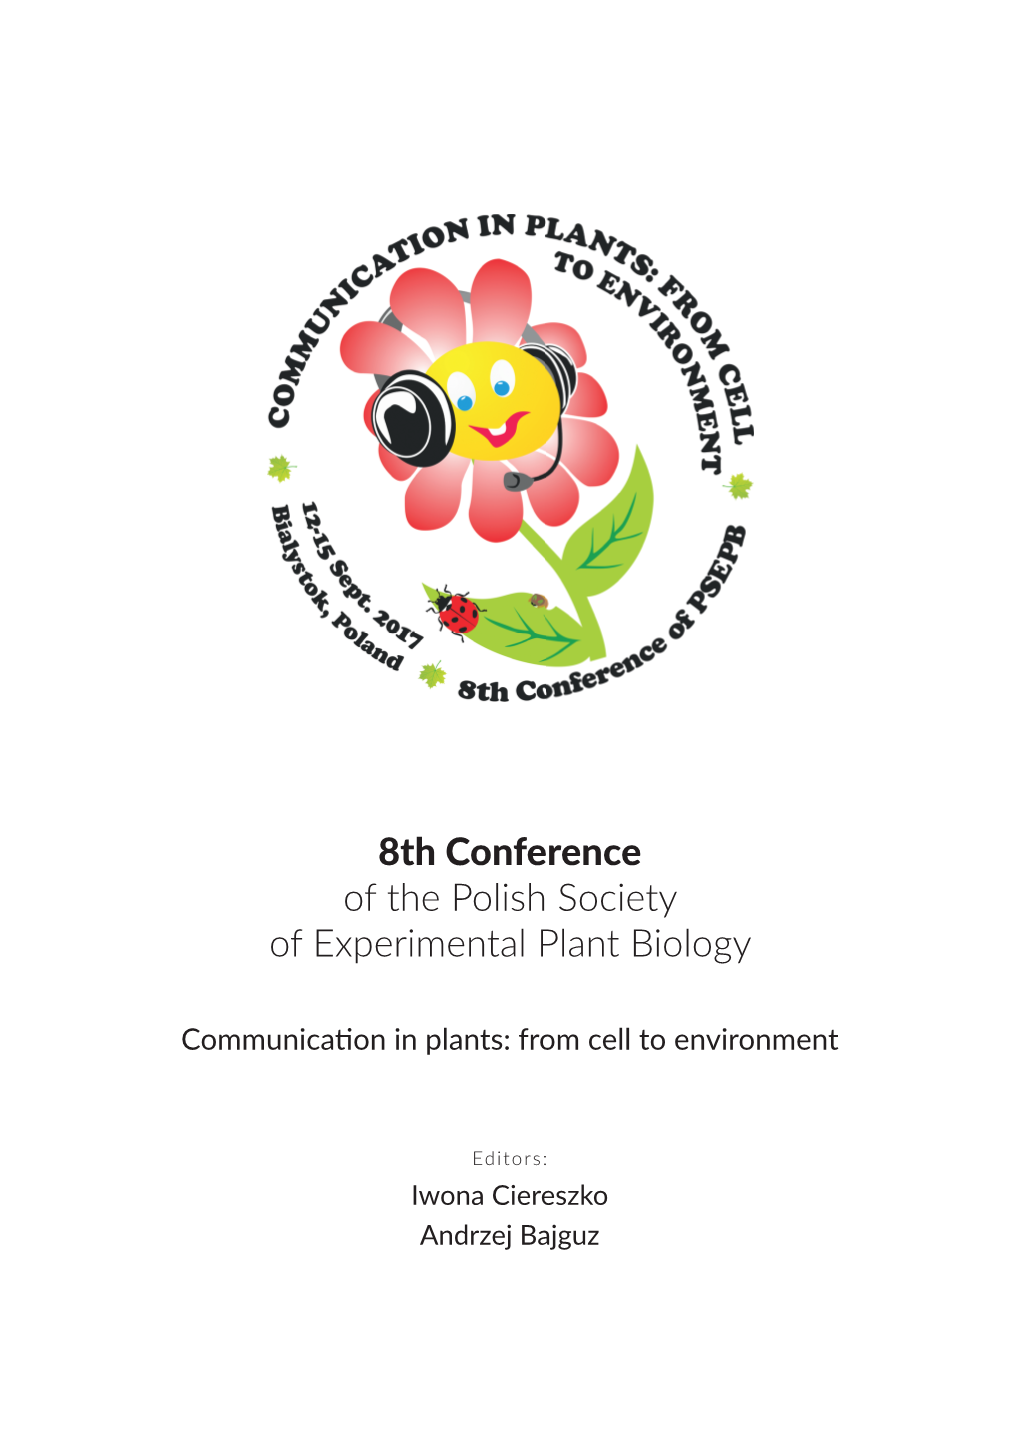 8Th Conference of the Polish Society of Experimental Plant Biology